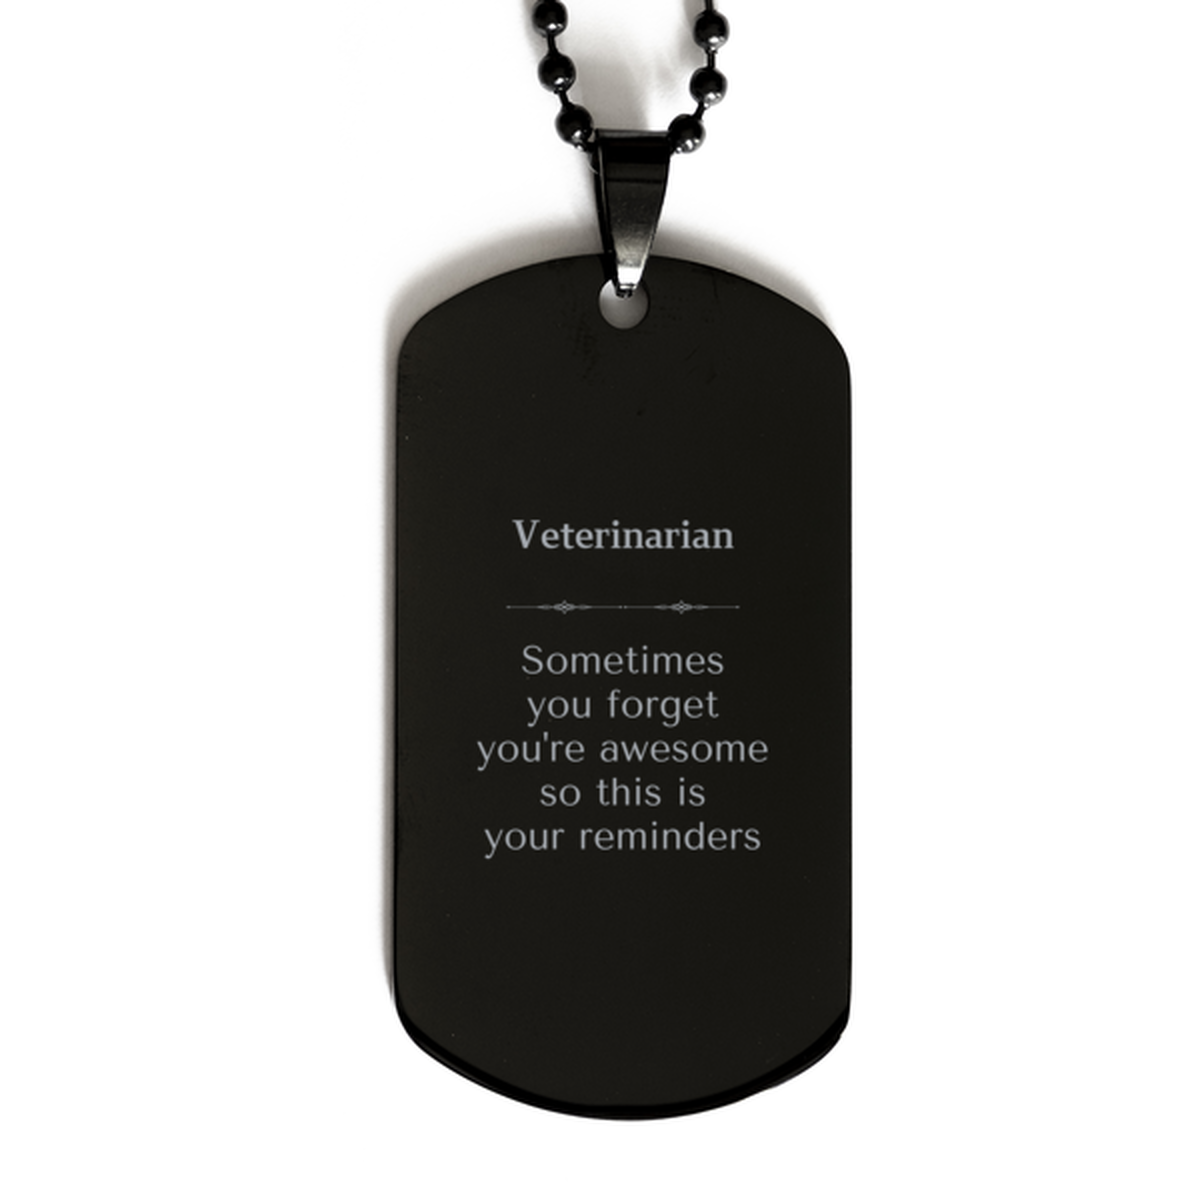 Sentimental Veterinarian Black Dog Tag, Veterinarian Sometimes you forget you're awesome so this is your reminders, Graduation Christmas Birthday Gifts for Veterinarian, Men, Women, Coworkers